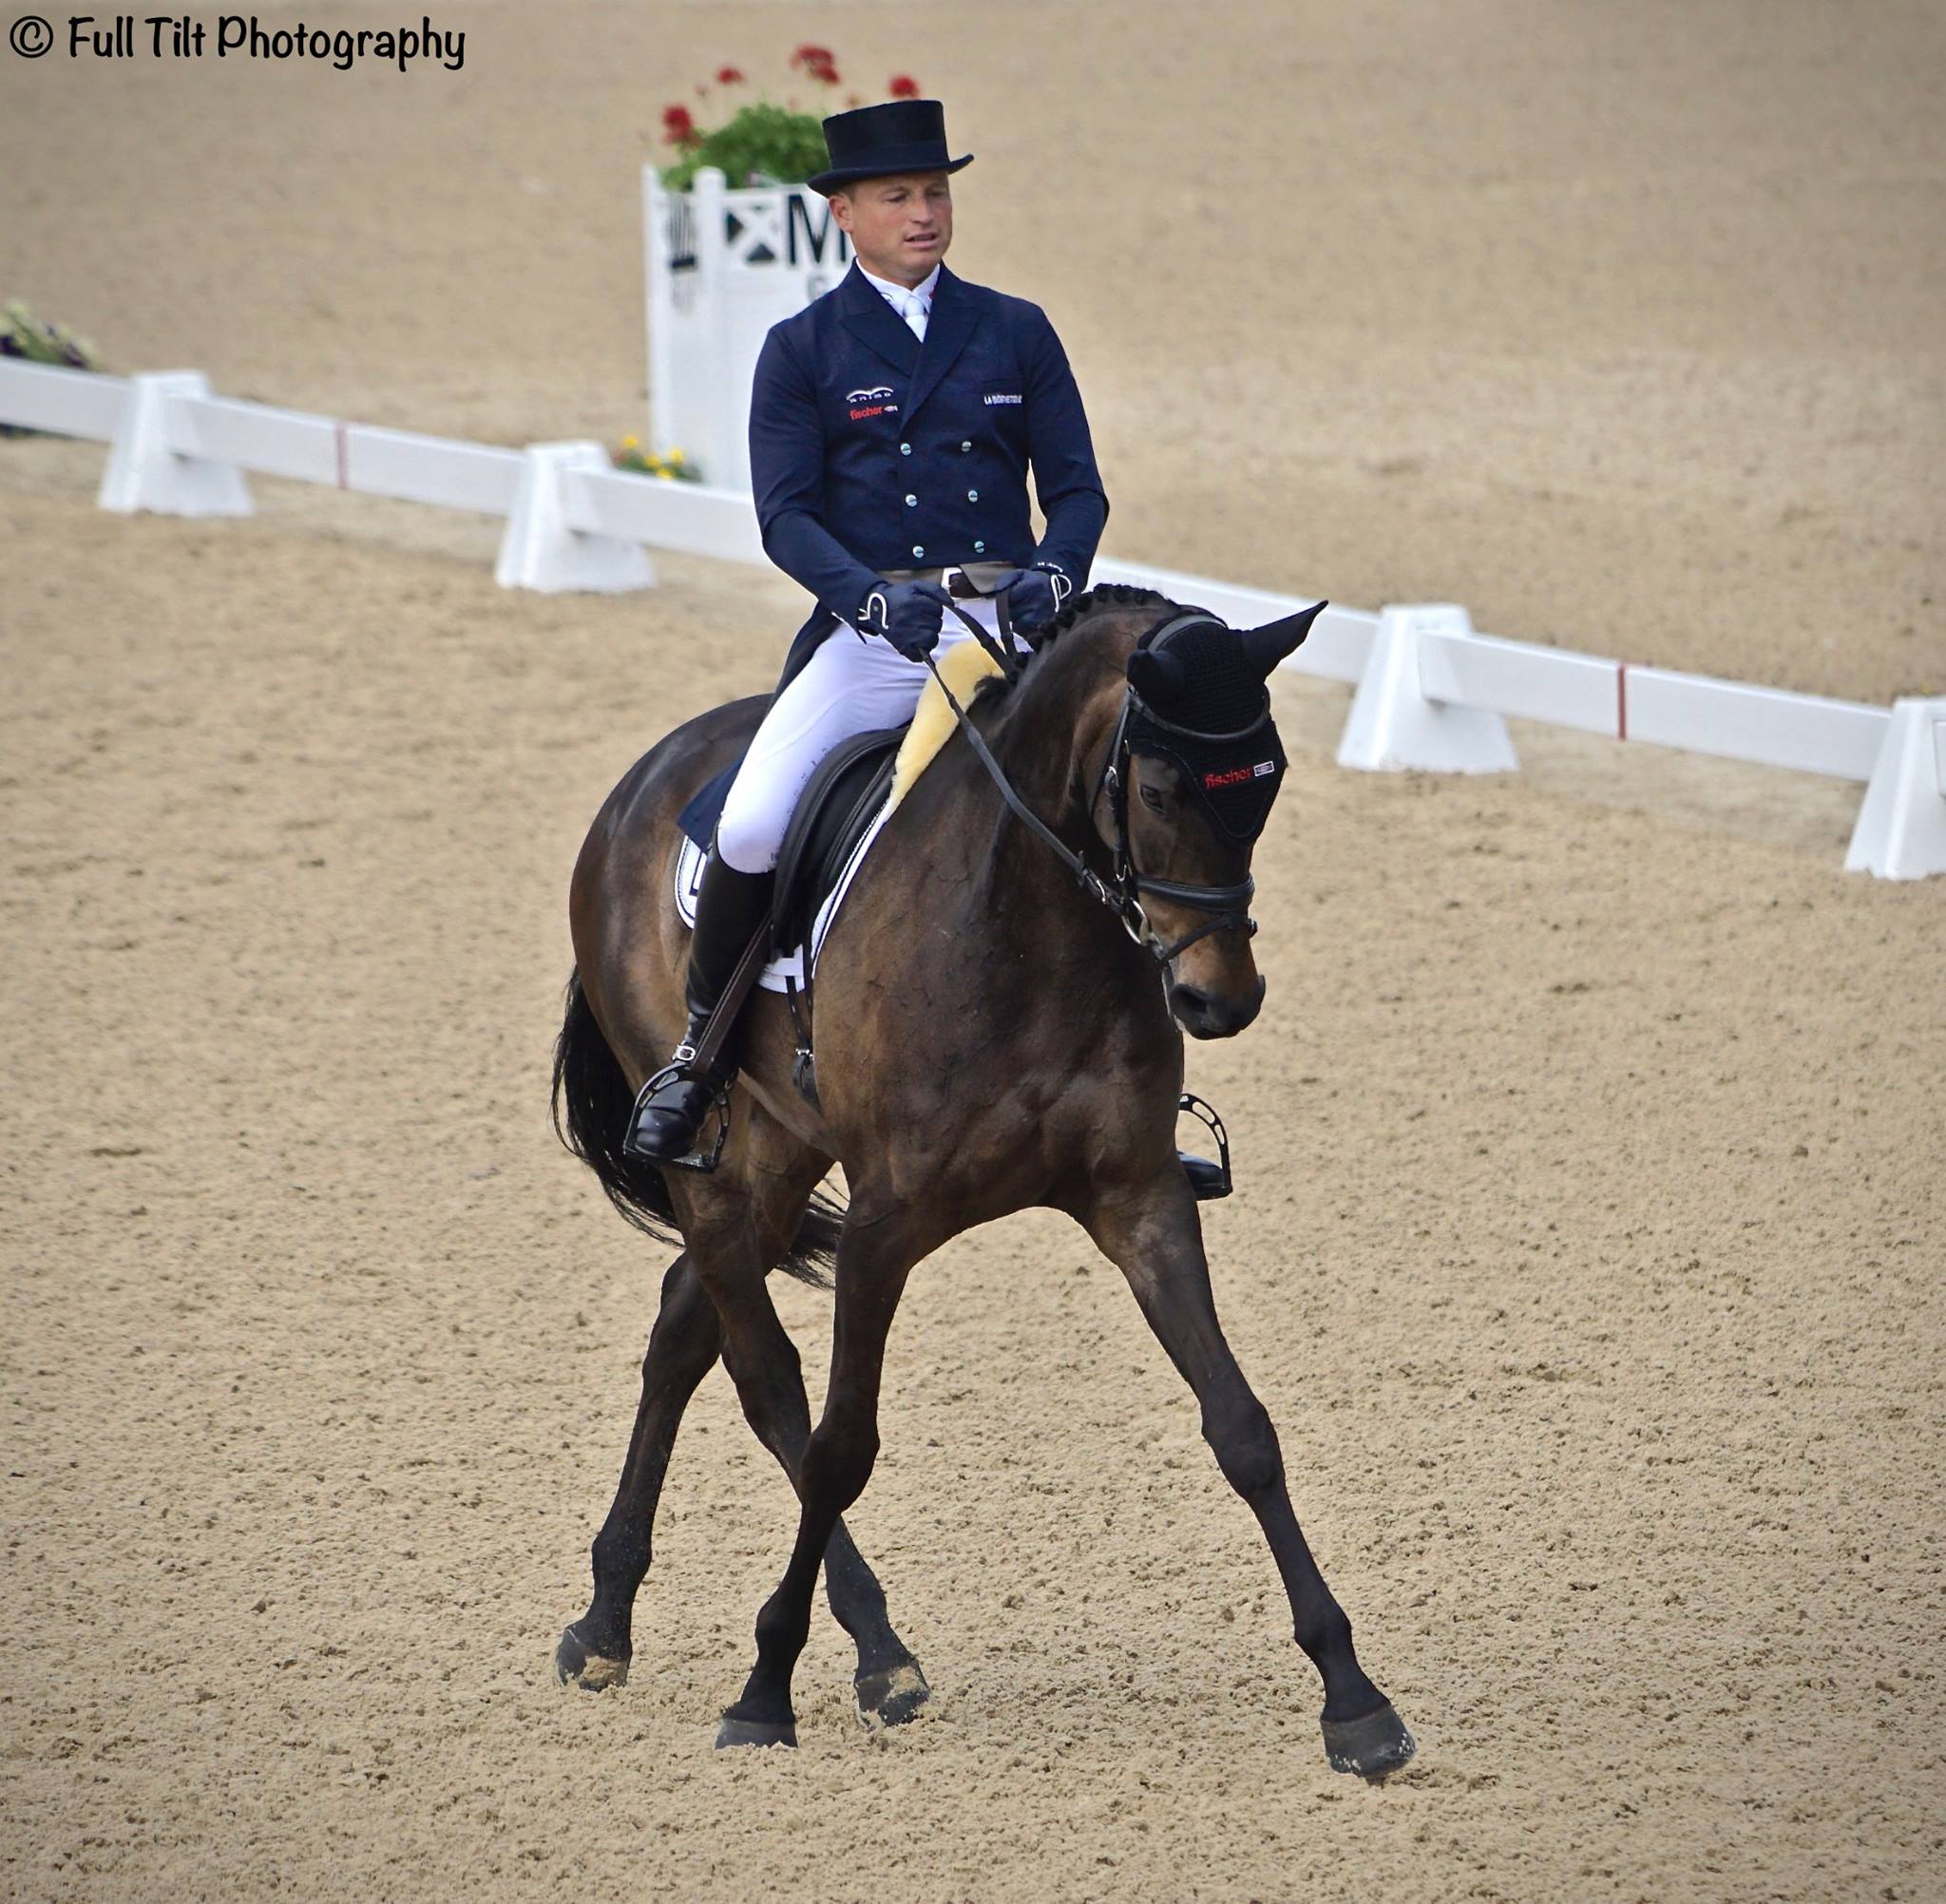 Half pass in Dressage | Eventing